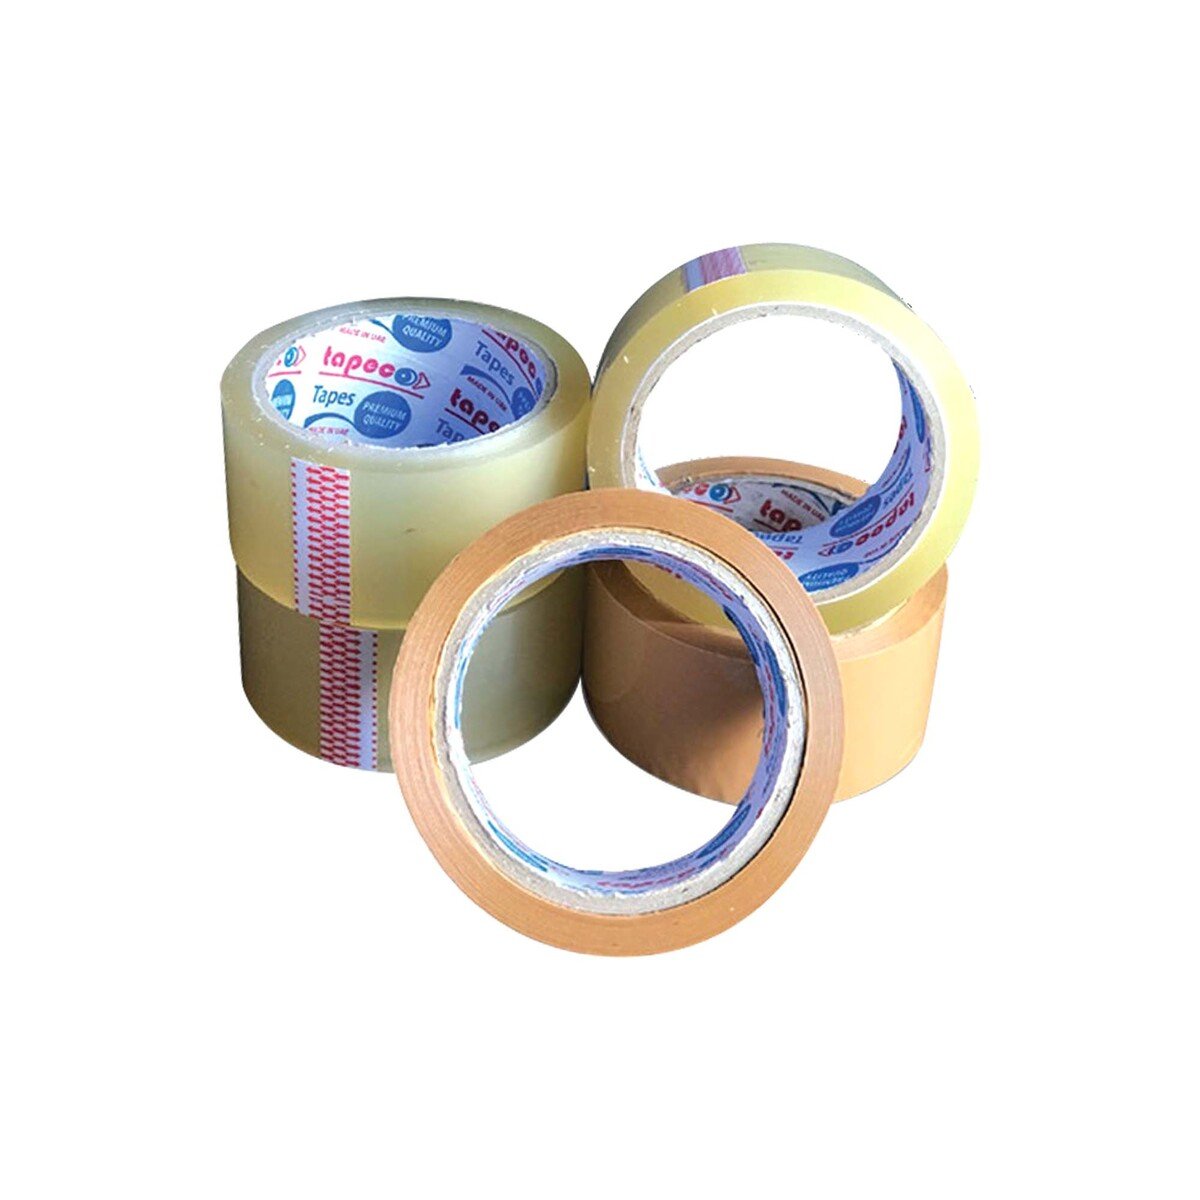 Top Line Packing Tape 5pcs Set Clear+Brown Assorted